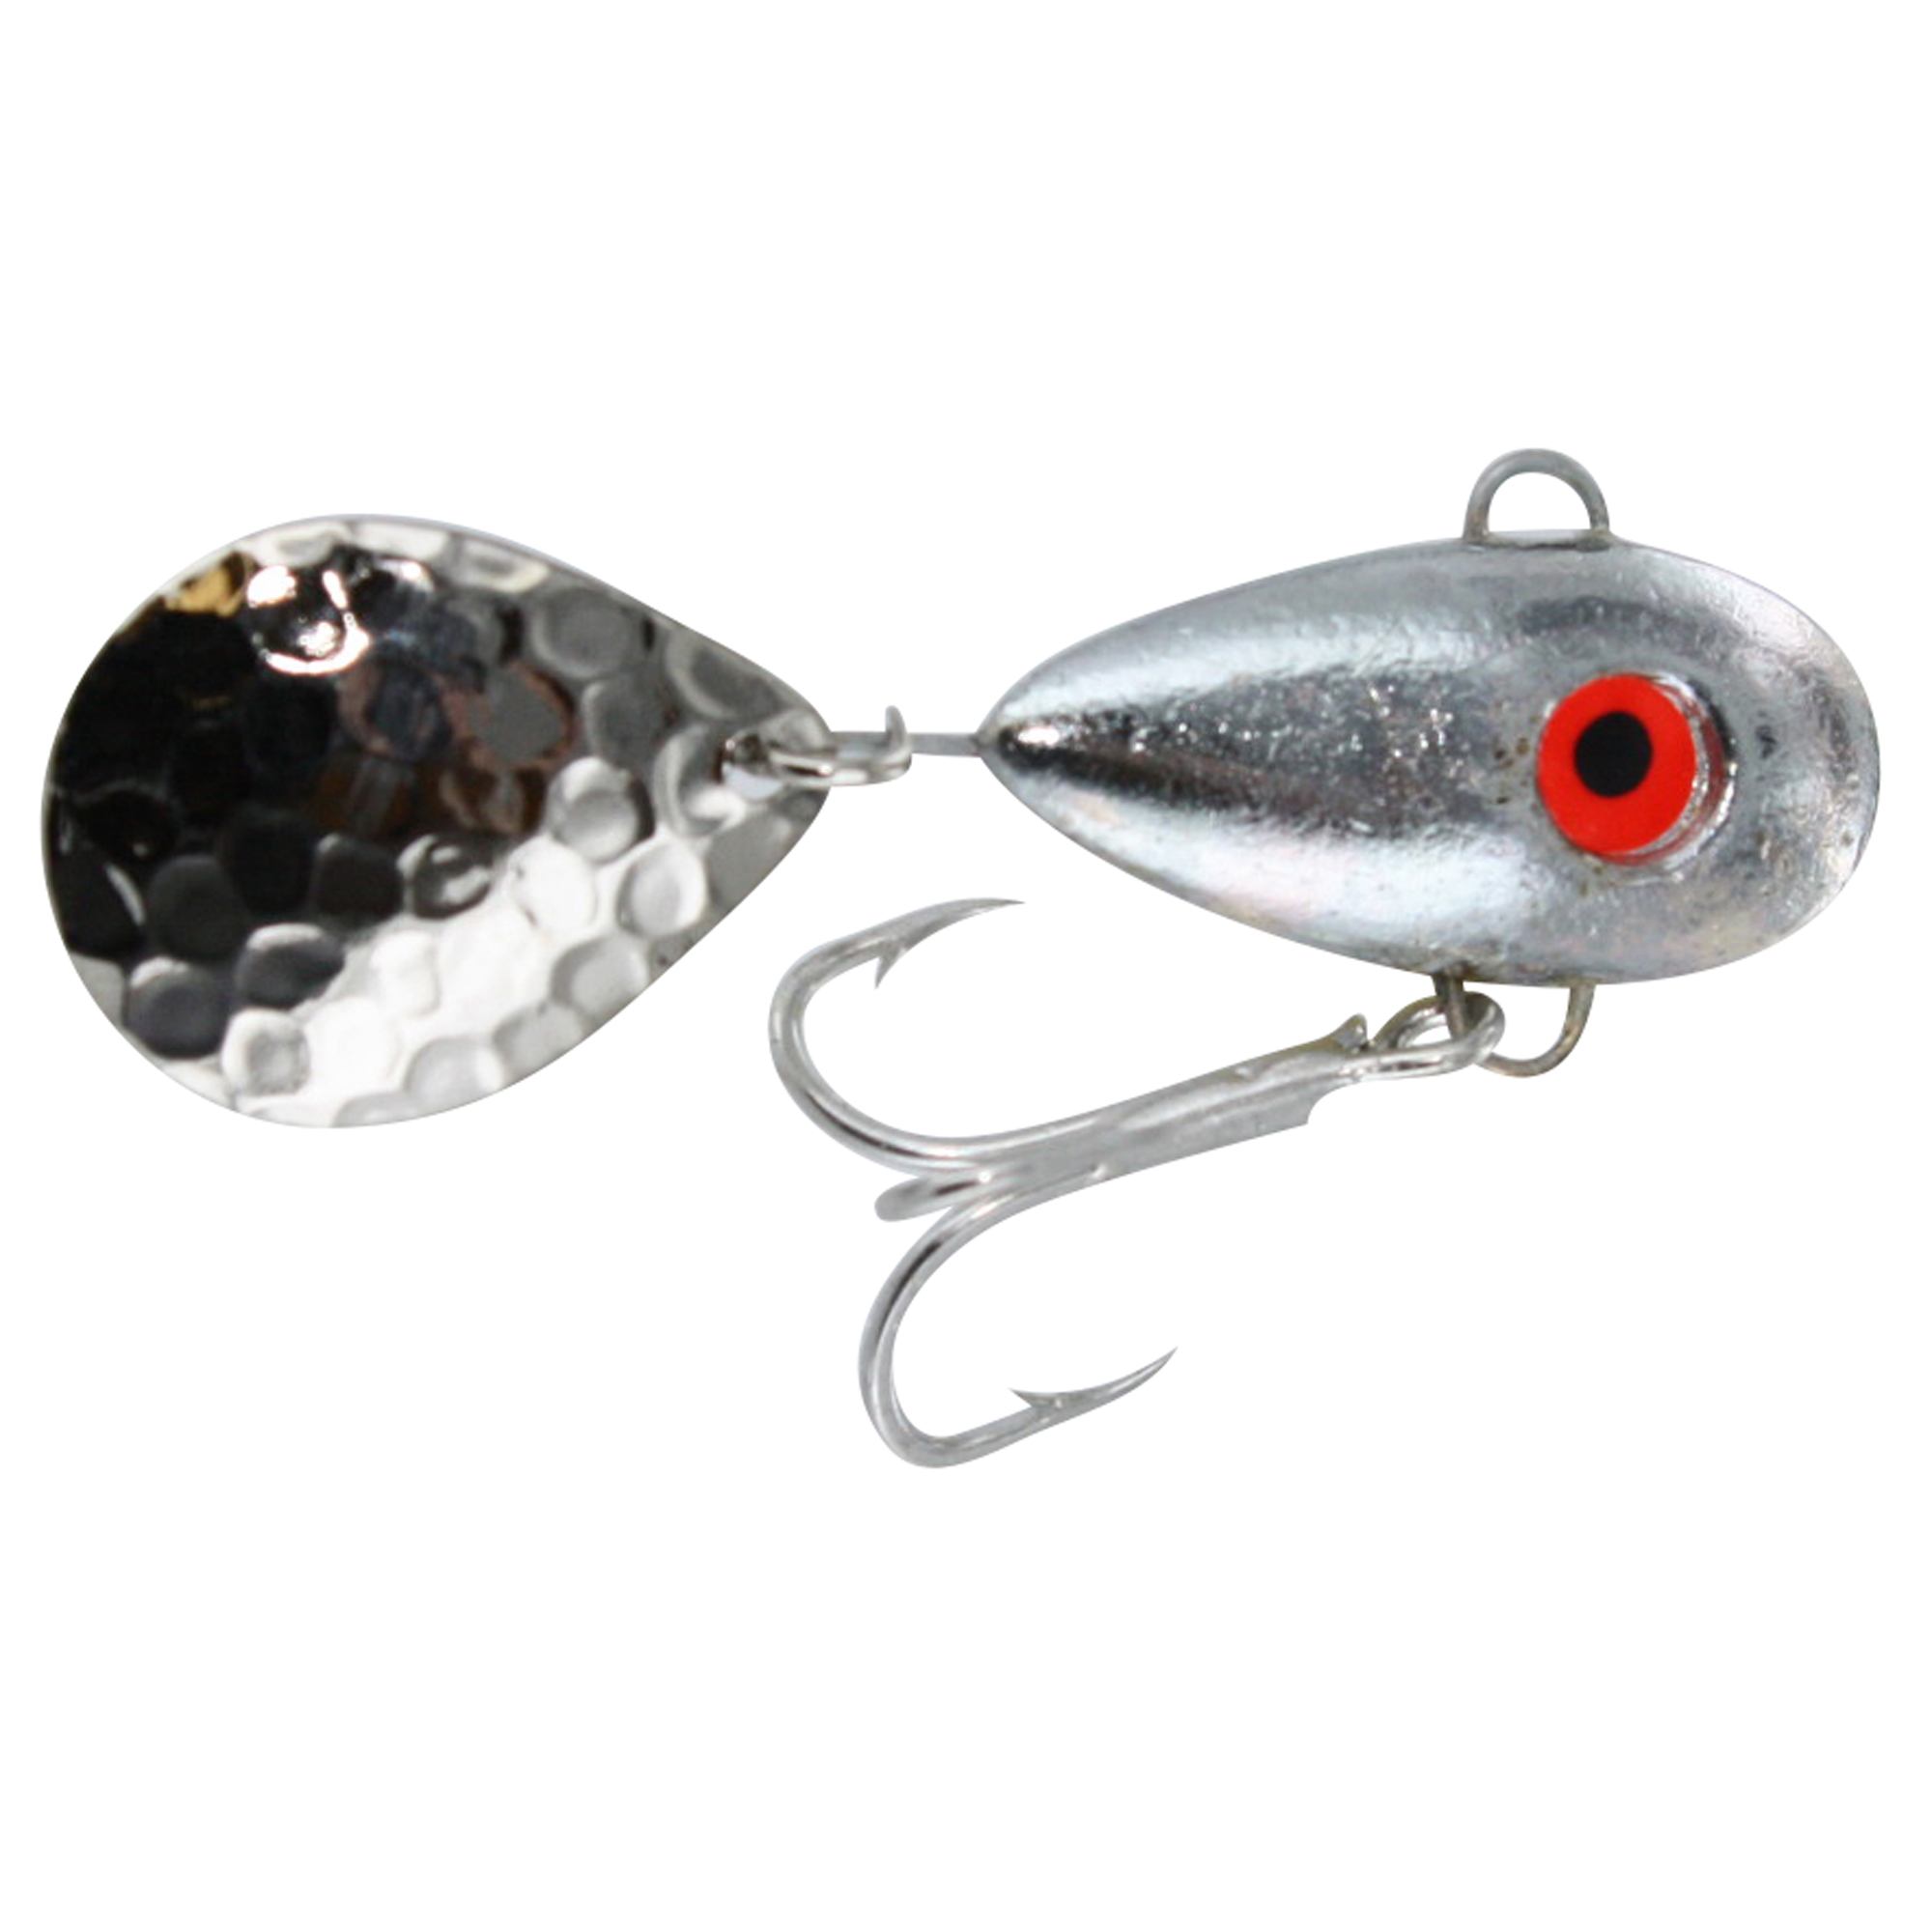 Mann's Bass Plastic Vintage Fishing Lures for sale